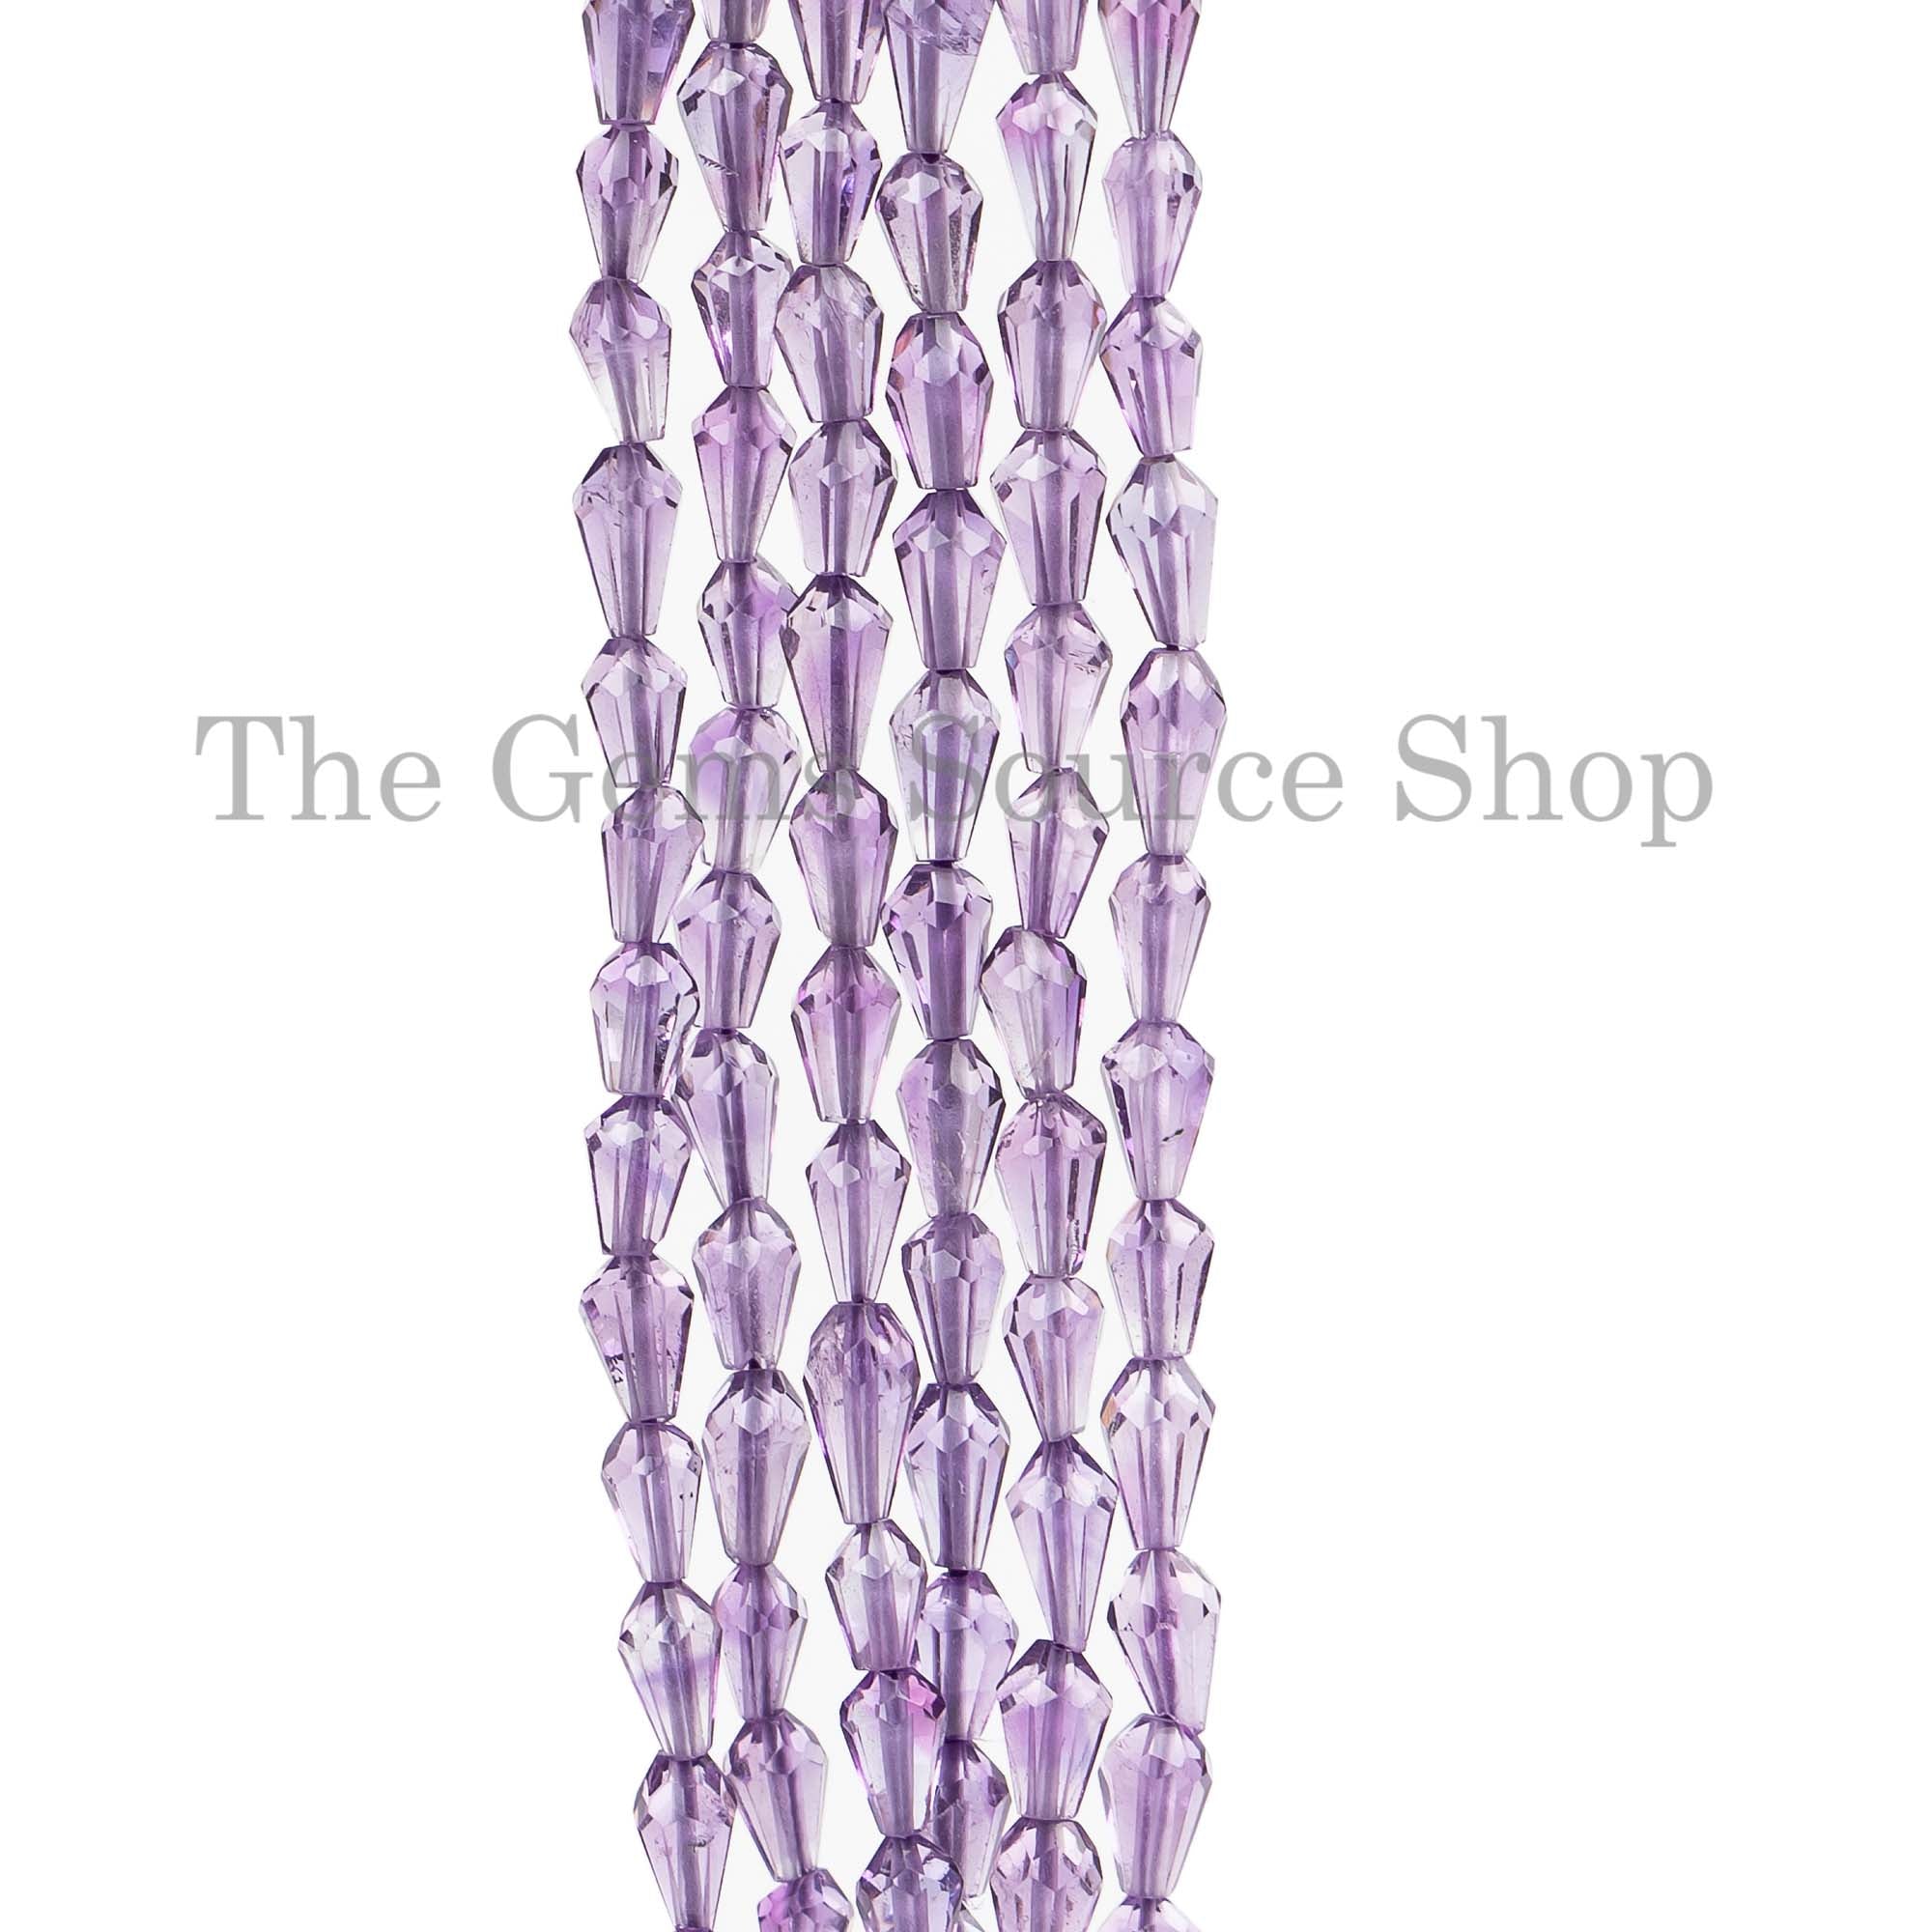 Amethyst Faceted Straight Drill Drop Beads, Amethyst Tear Drop Beads, Amethyst Faceted Beads